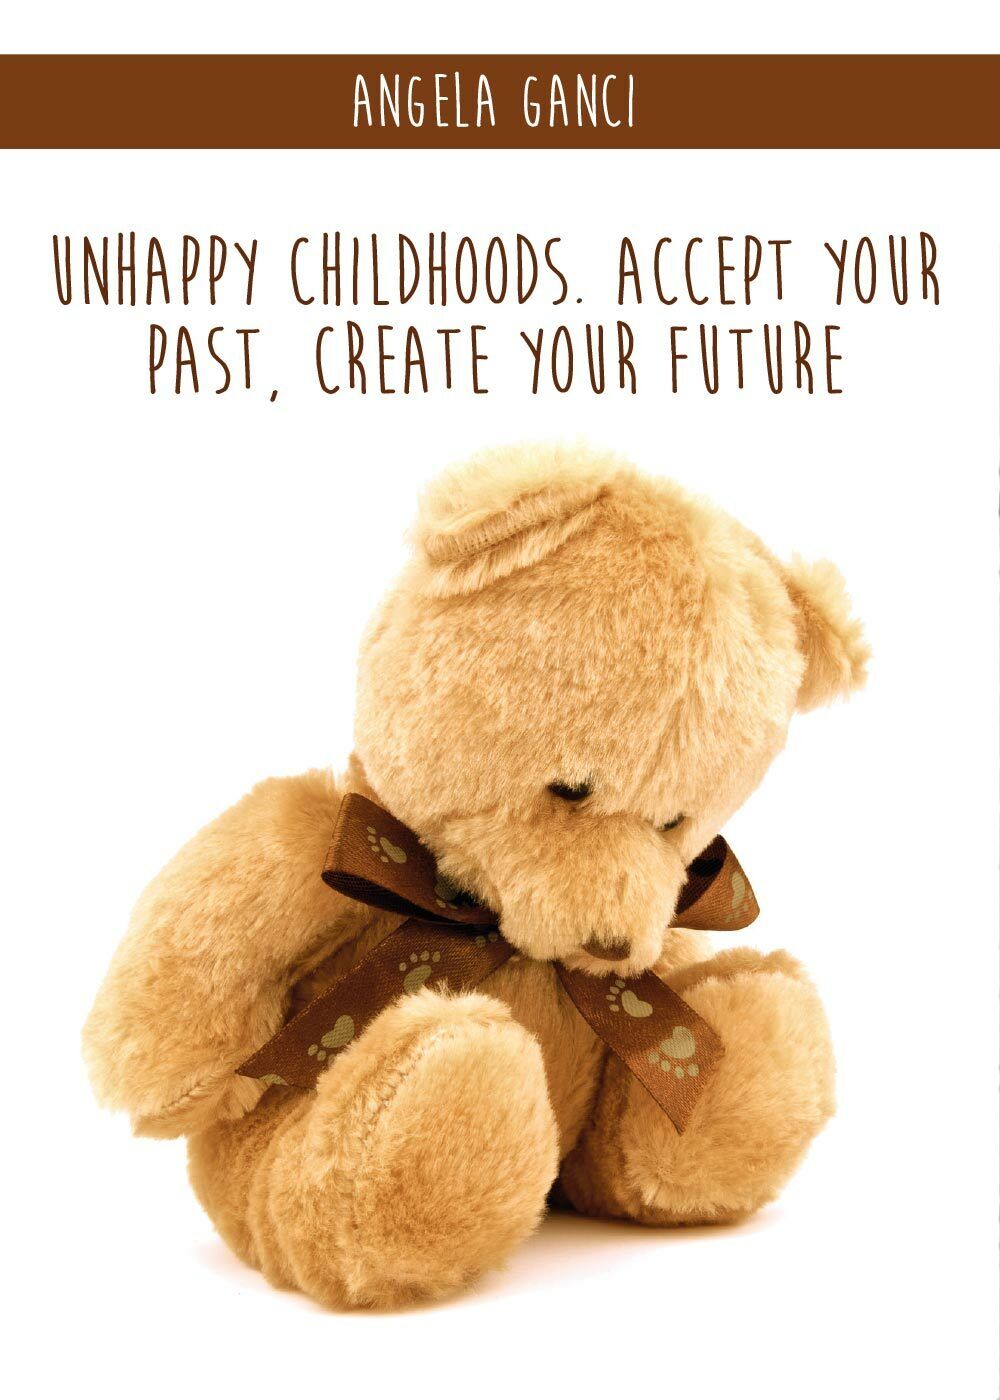 Unhappy Childhoods. Accept Your Past, Create Your Future - ER